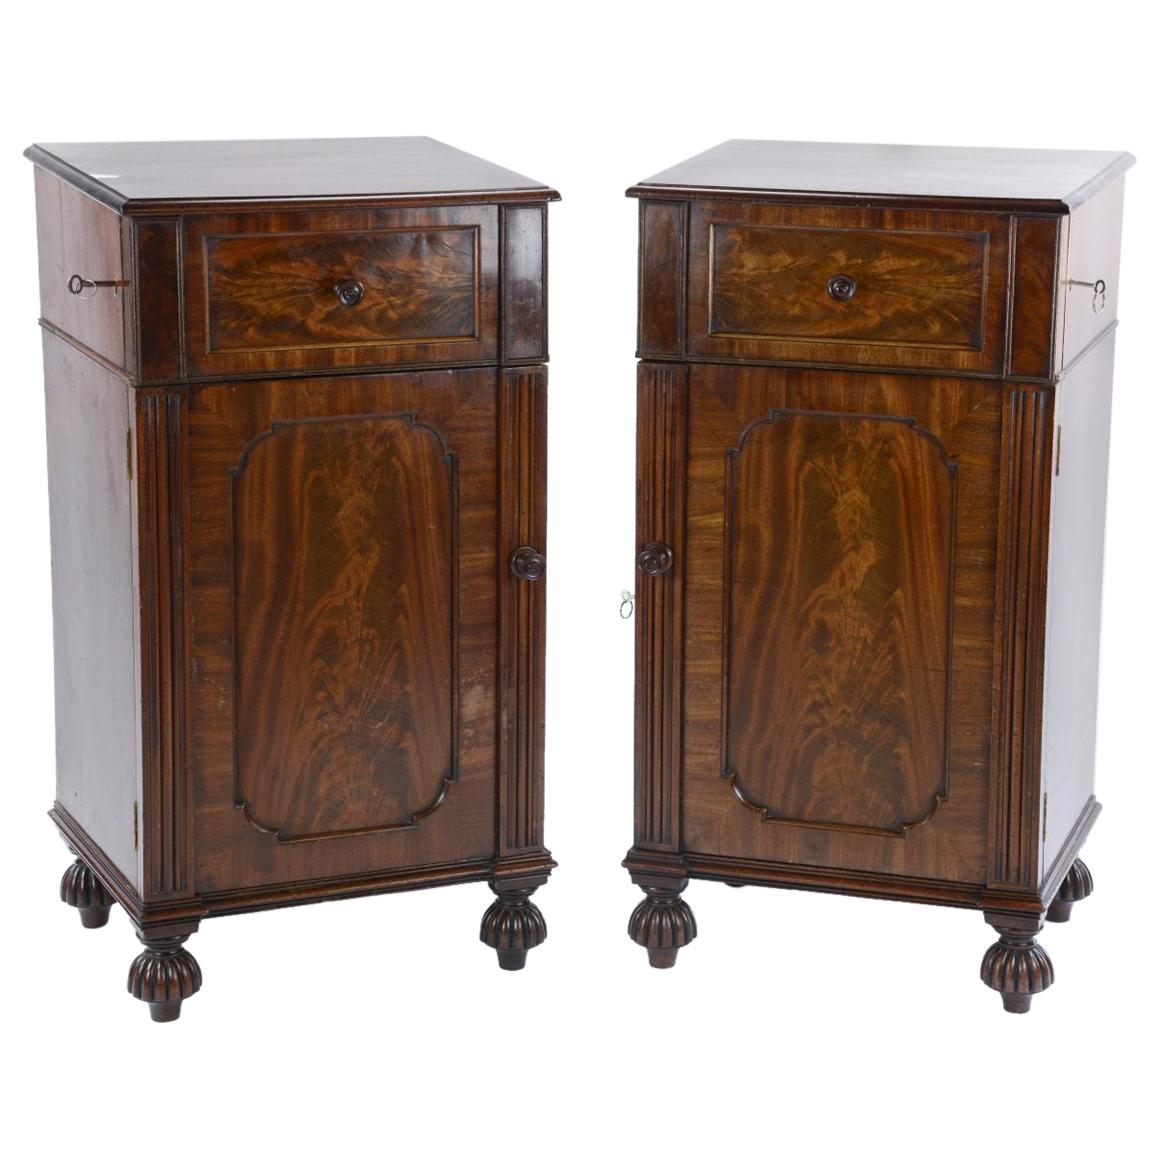 Pair of William IV Mahogany Pedestal Cupboards in the Manner of Gillows